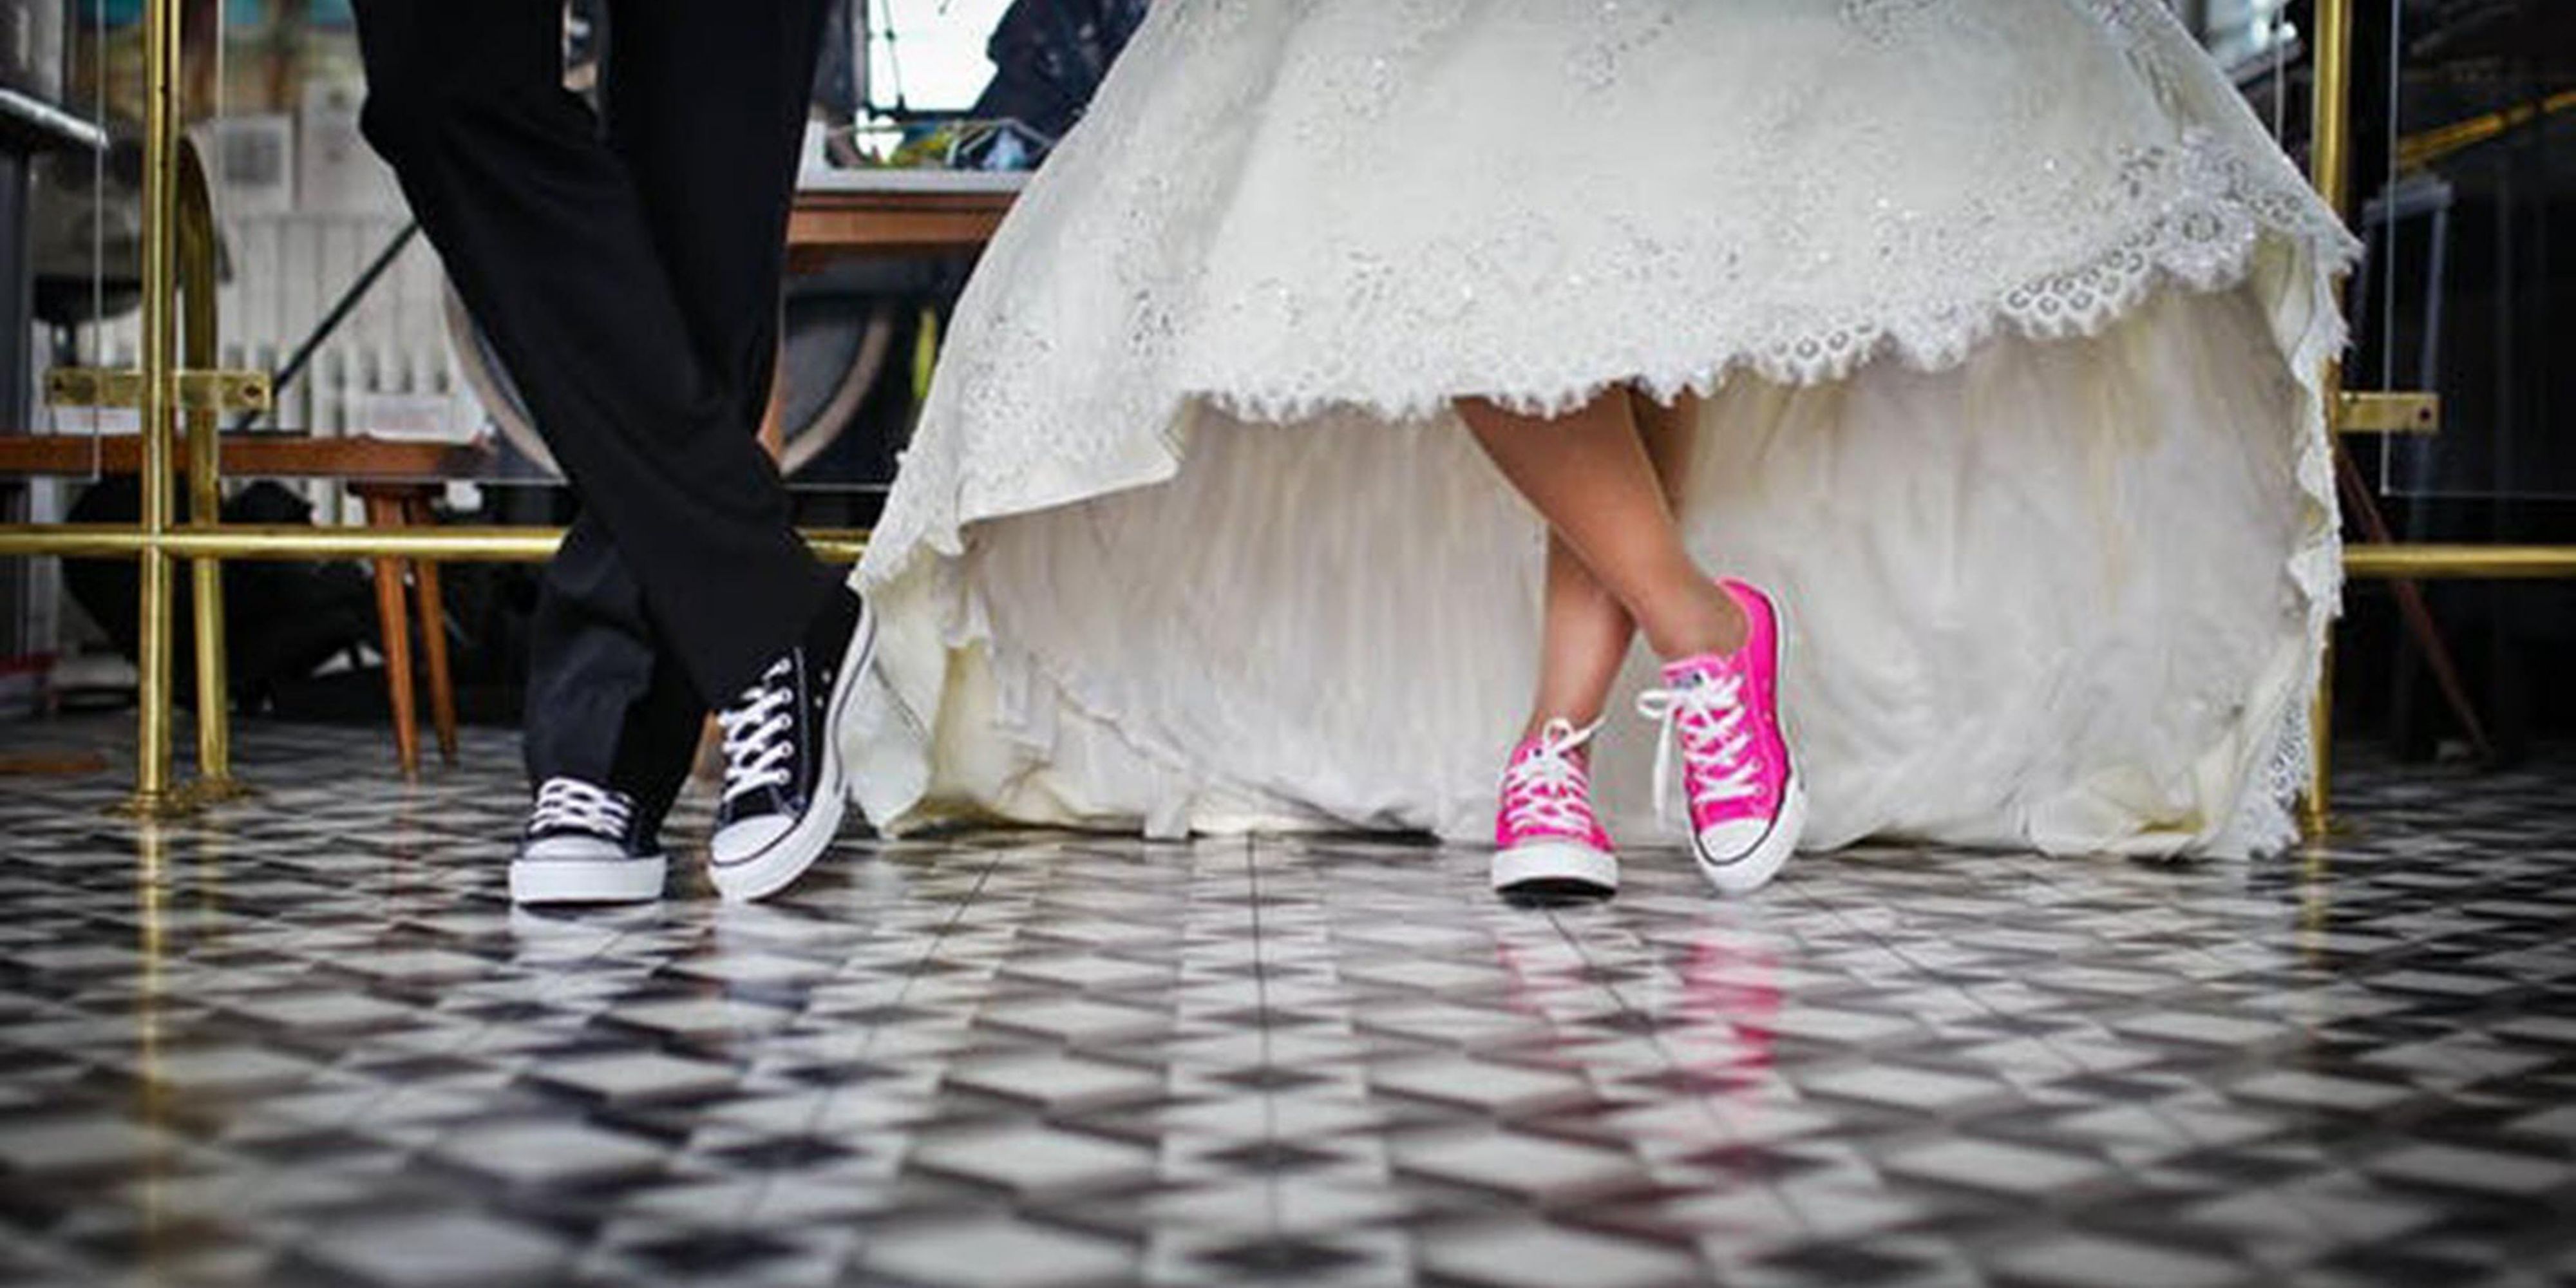 Need a place for your wedding guests to stay for the big weekend? We offer GREAT discounts just for you. Contact the hotel for a personalized quote today!